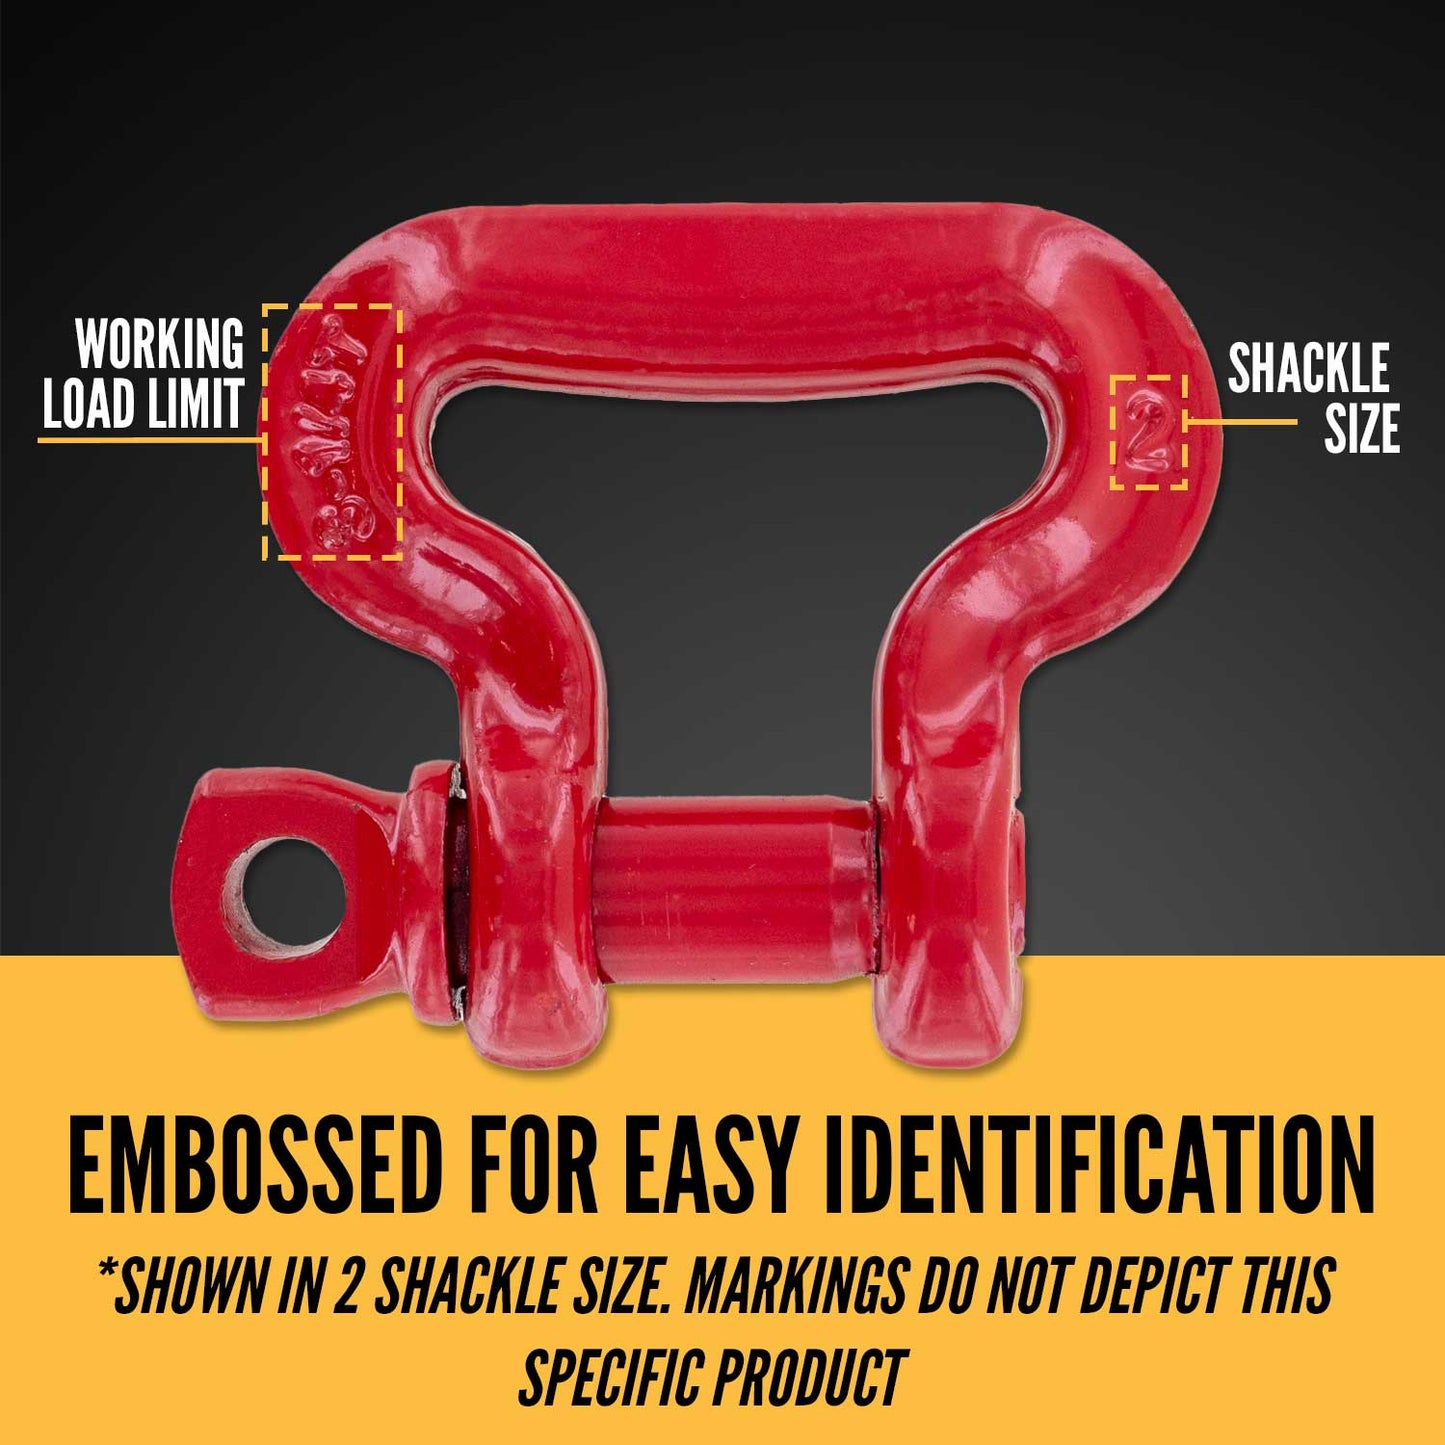 Crosby® Screw Pin Sling Saver Shackle | S-281 - 4.5 Ton embossed for easy identification